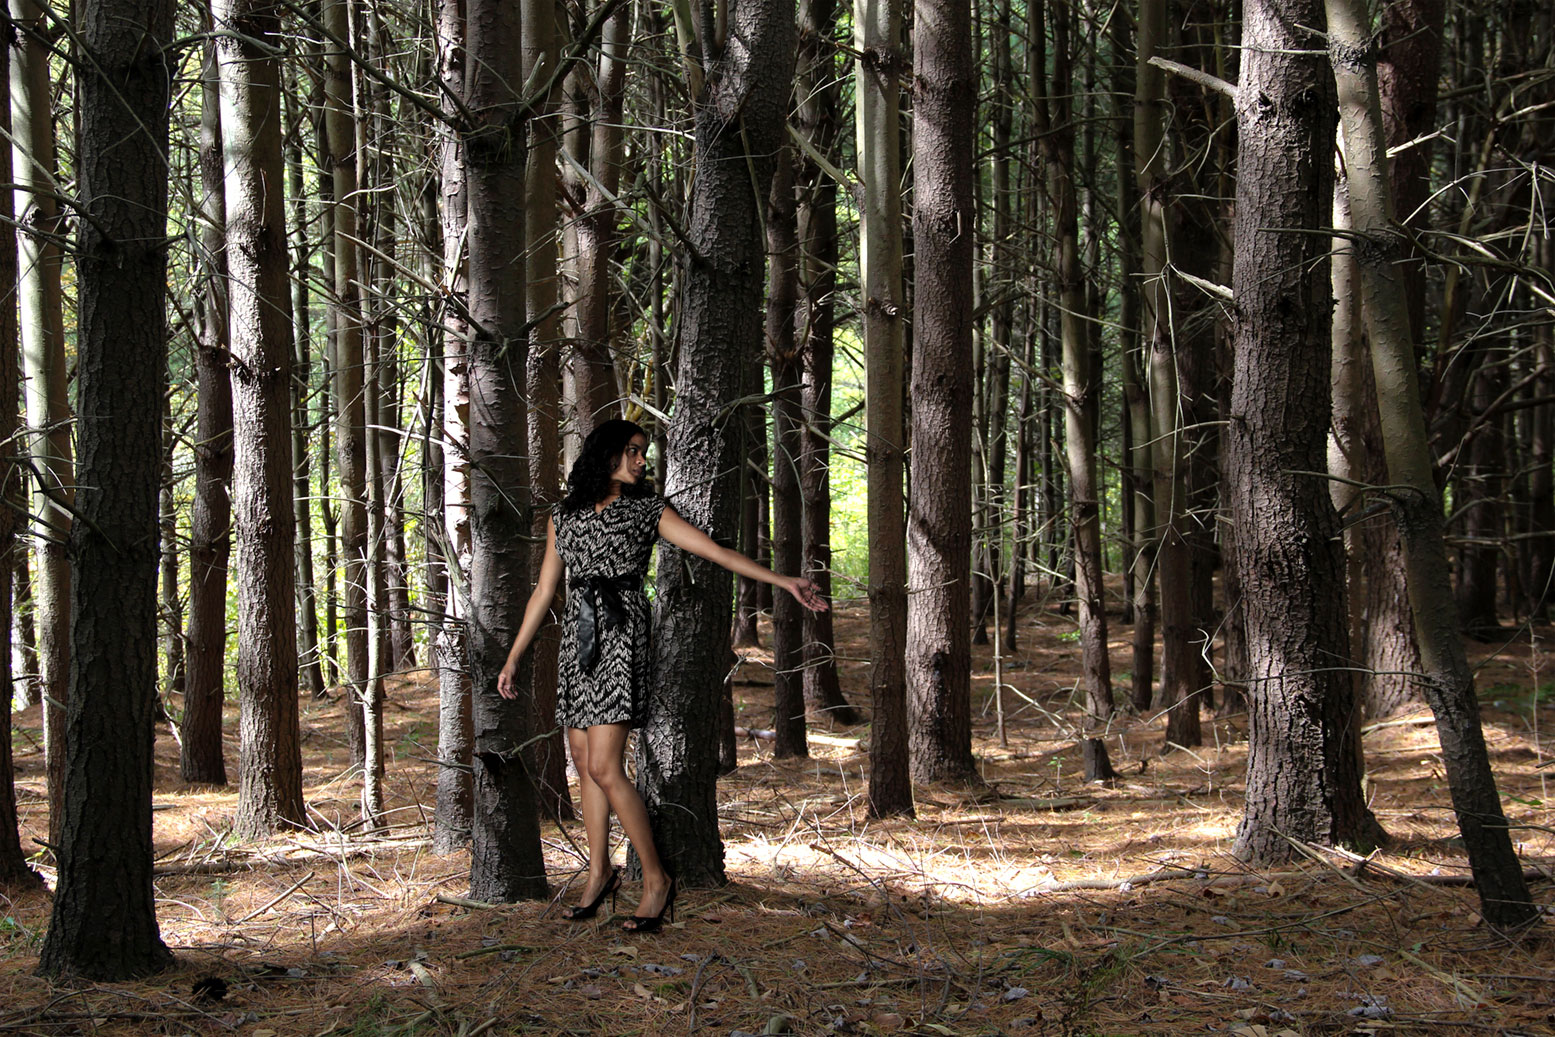 Composite image of a woman dressed up in woods